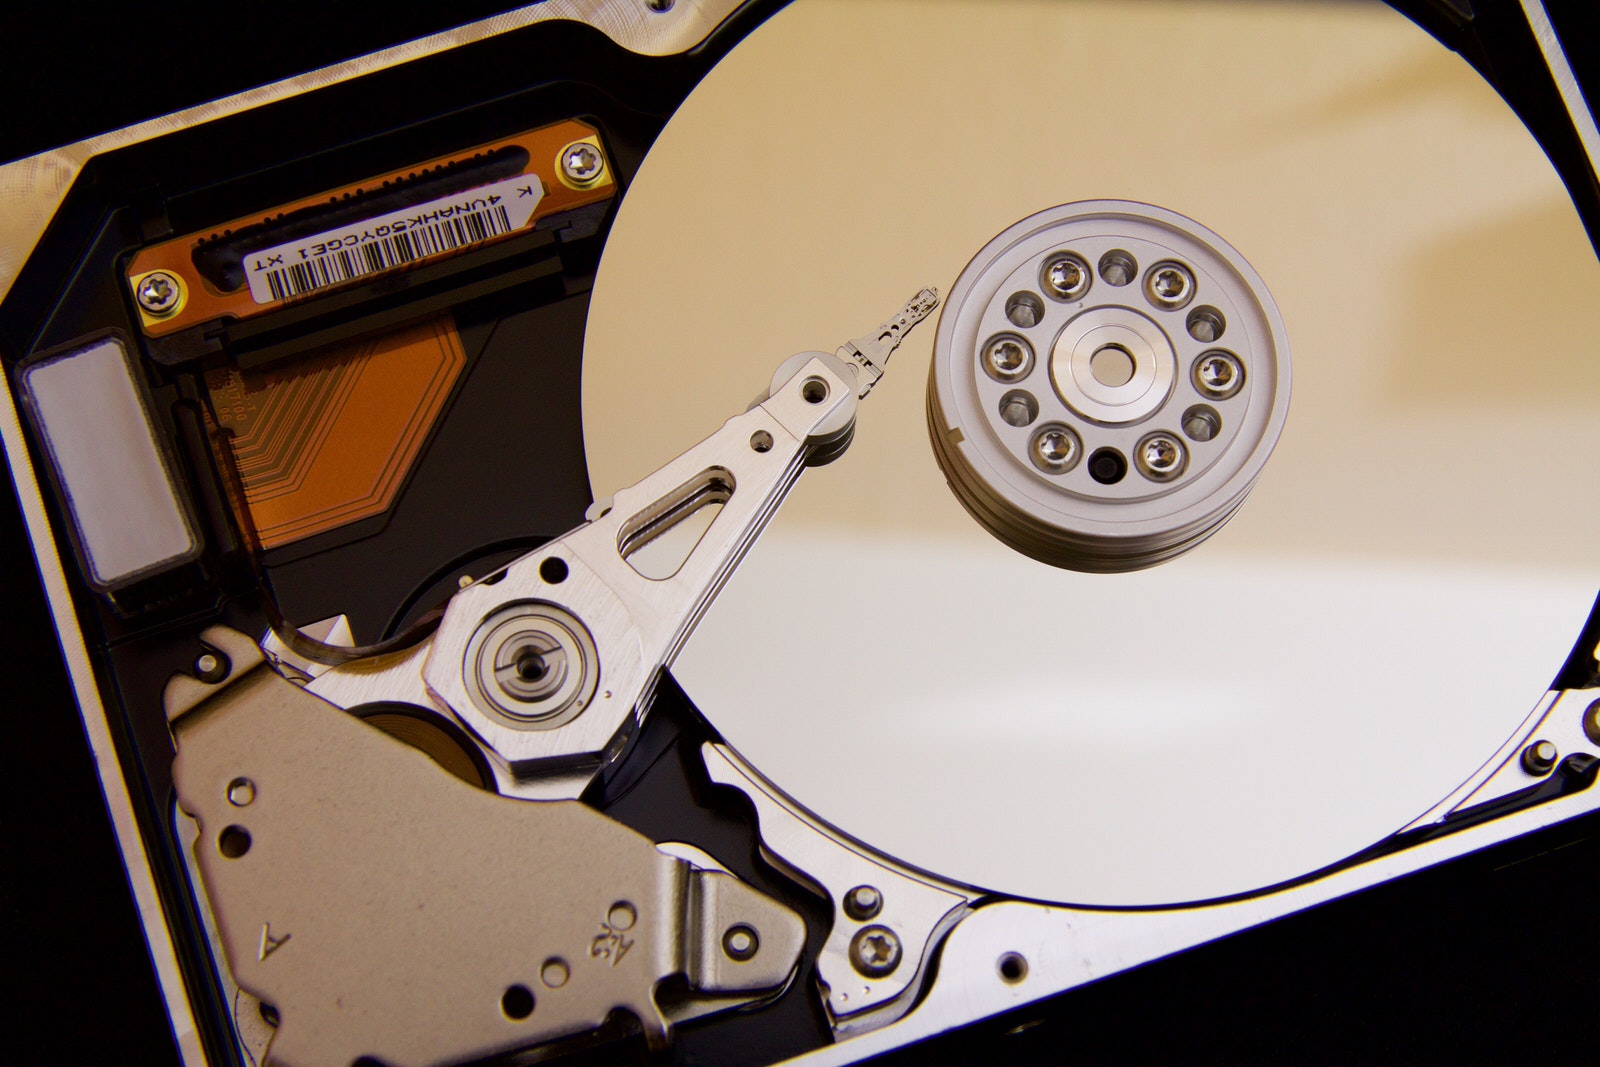 An inside look of a hard disk drive, featuring a spindle and circular disks that hold data.